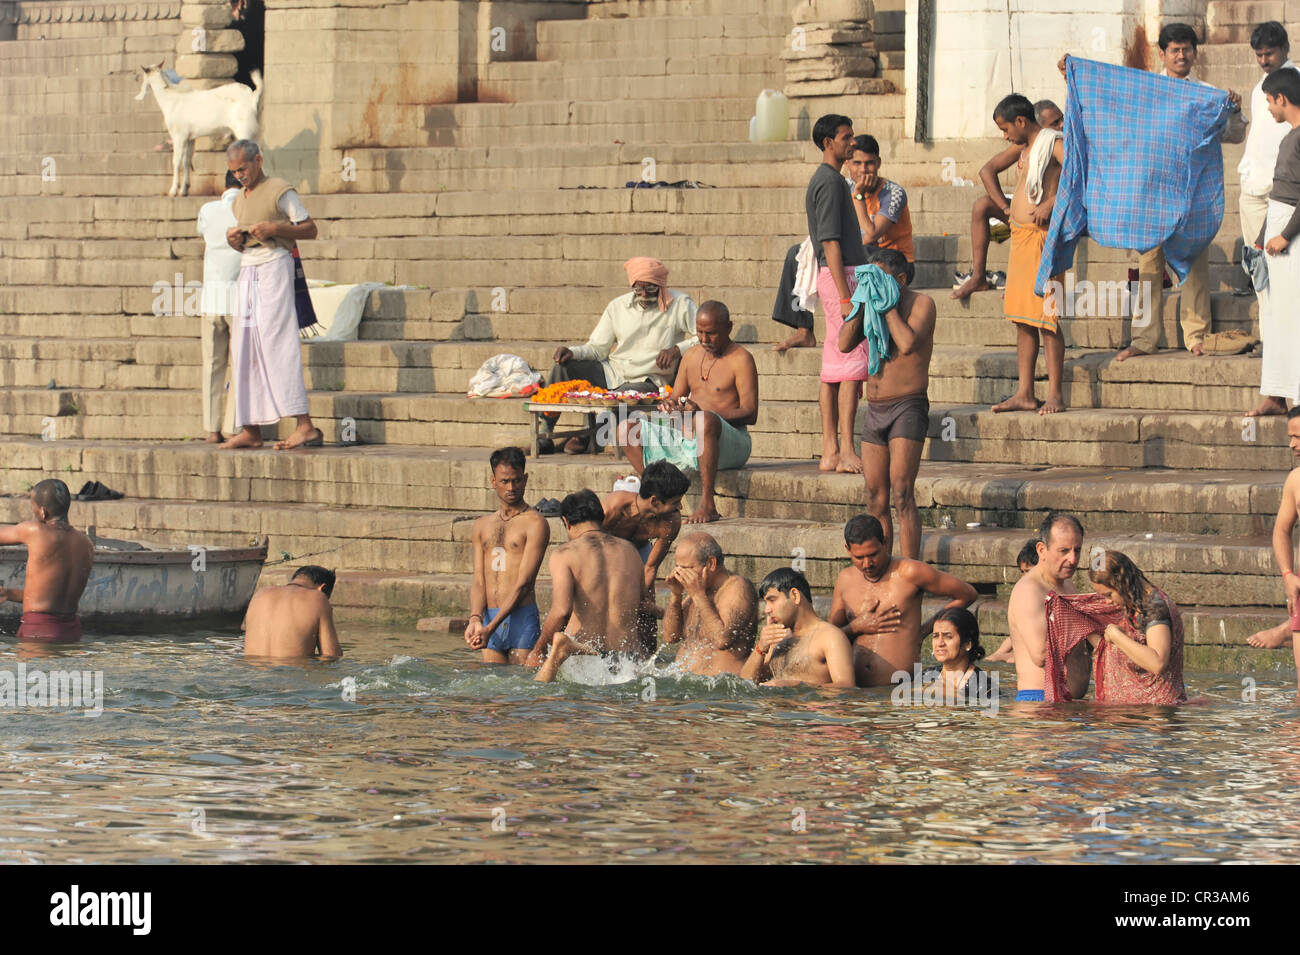 Believers during the ritual washing on the banks of the Ganges River in Varanasi, Benares, Uttar Pradesh, India, South Asia Stock Photo